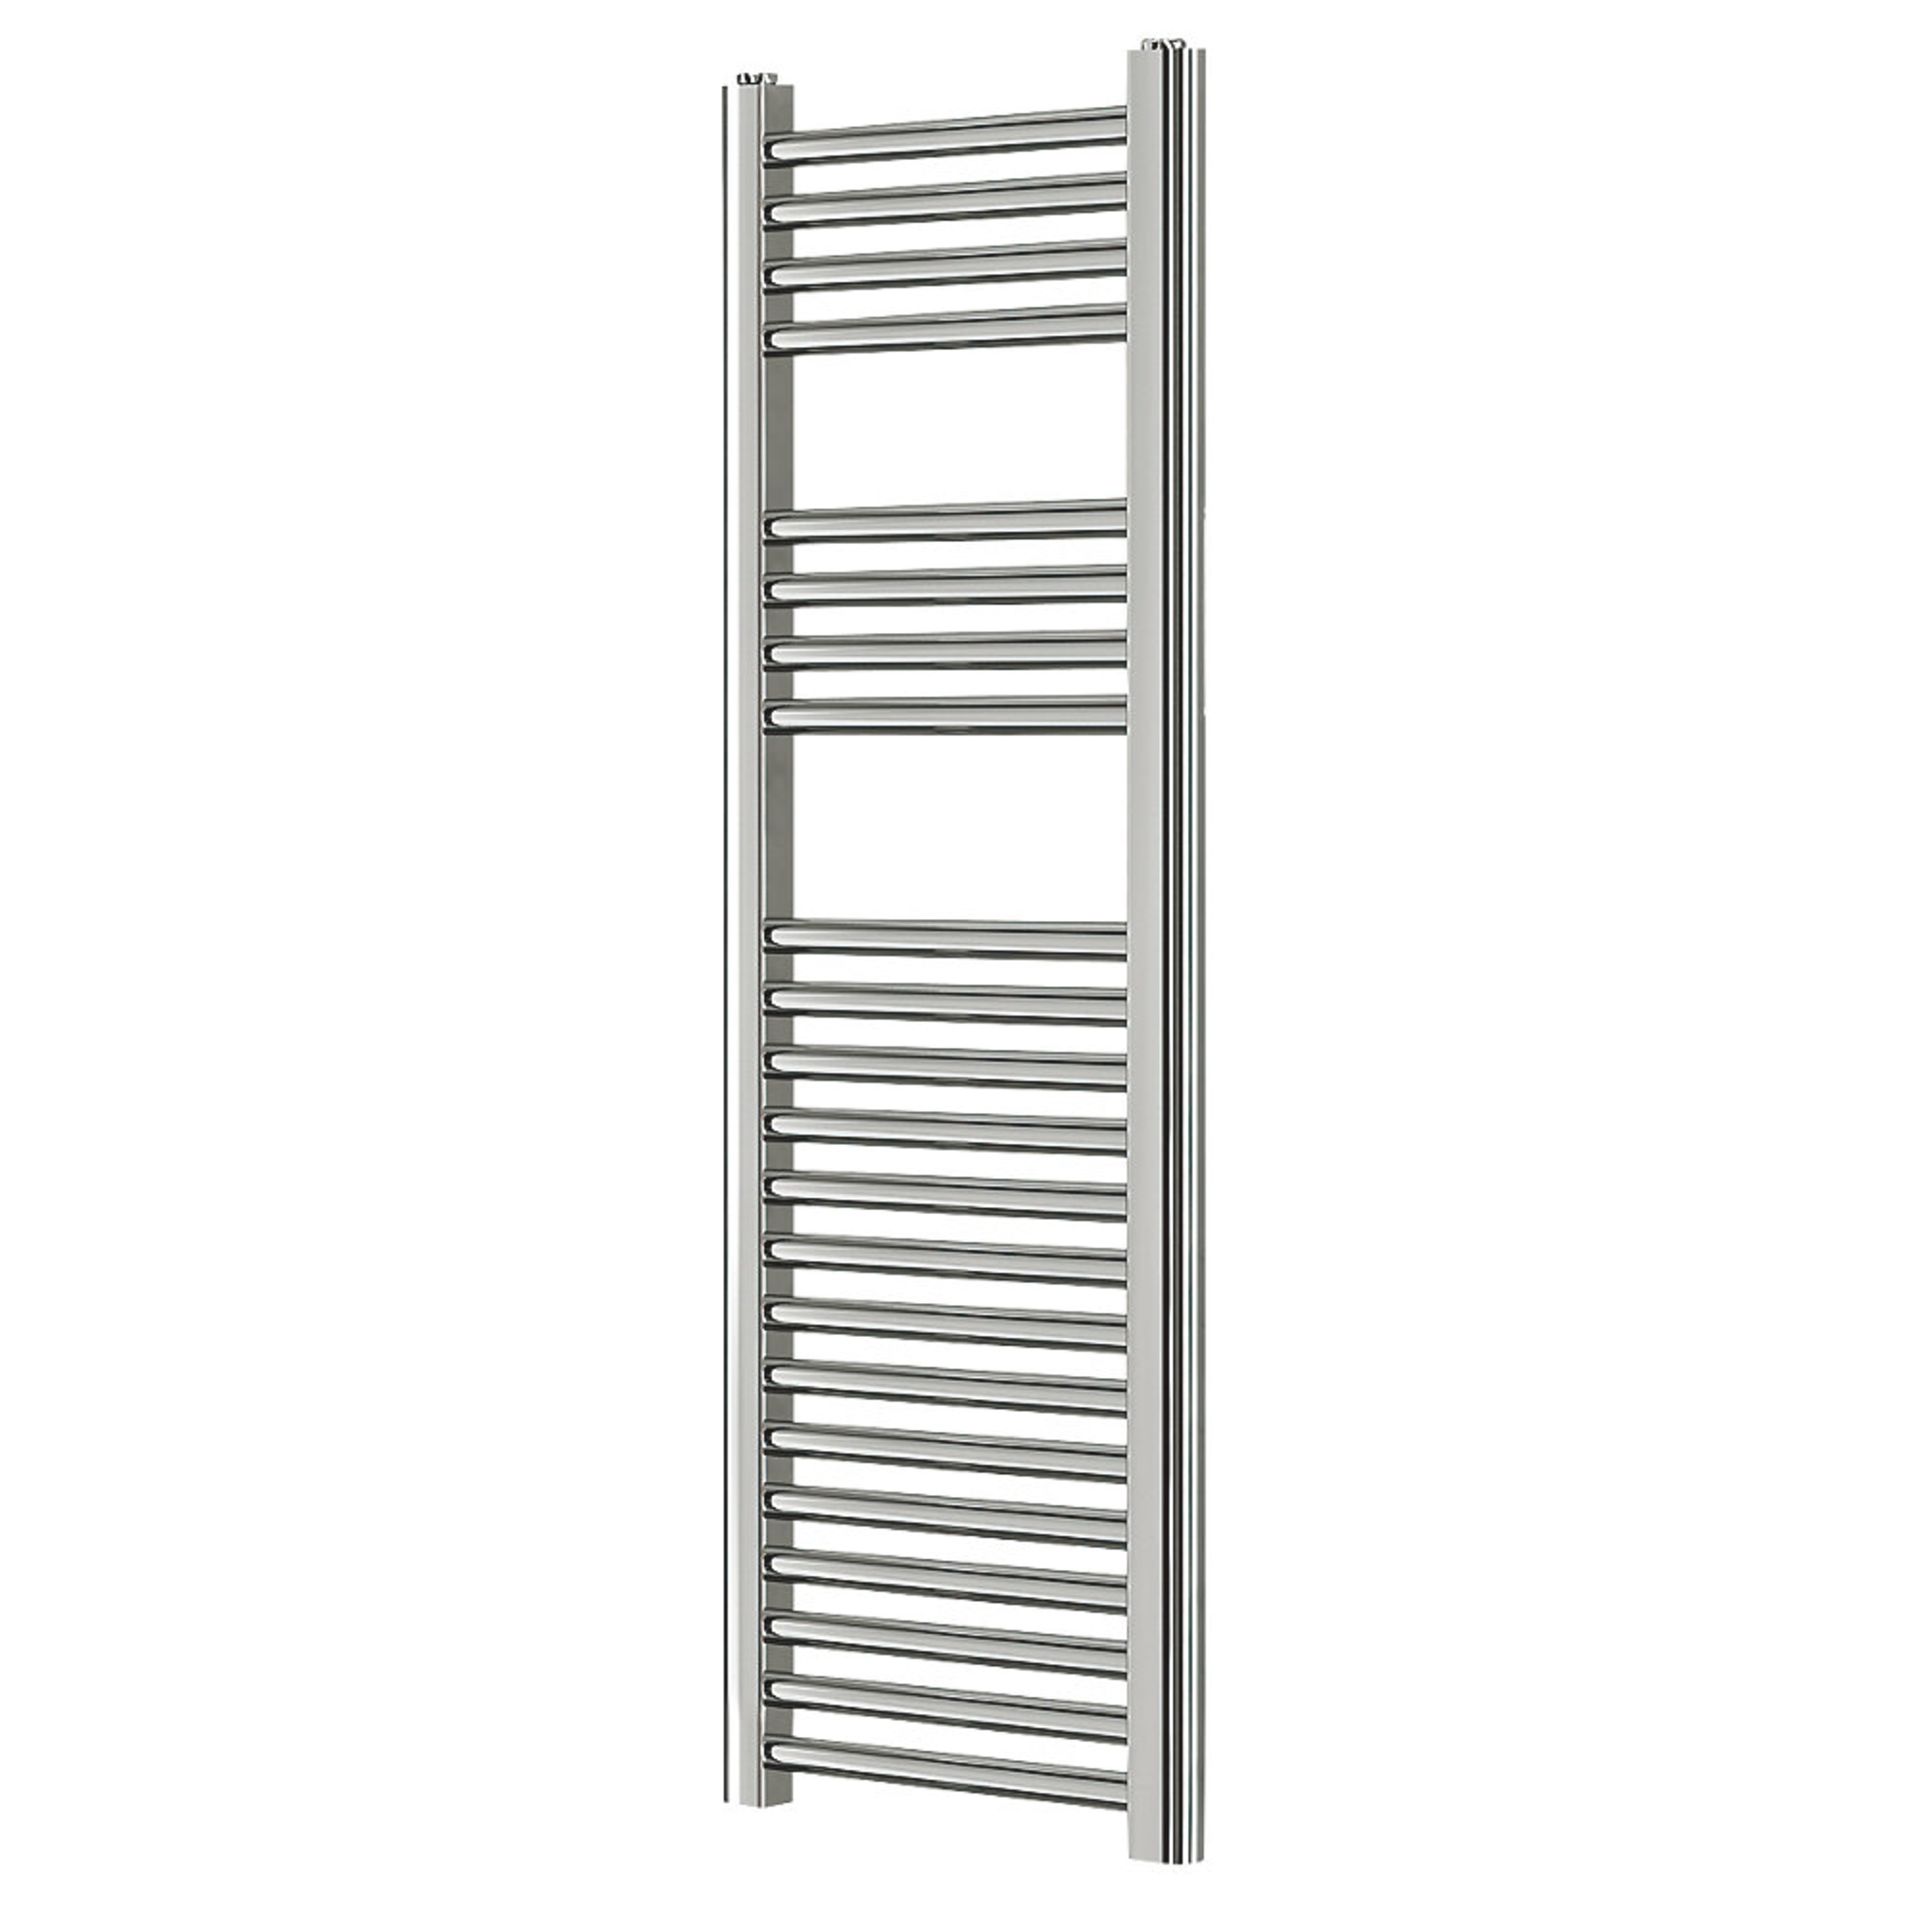 New (G52) 1100x300 mm Chrome Flat Ladder Towel Radiator. Made From Chrome Plated Low Carbon Ste - Image 2 of 2